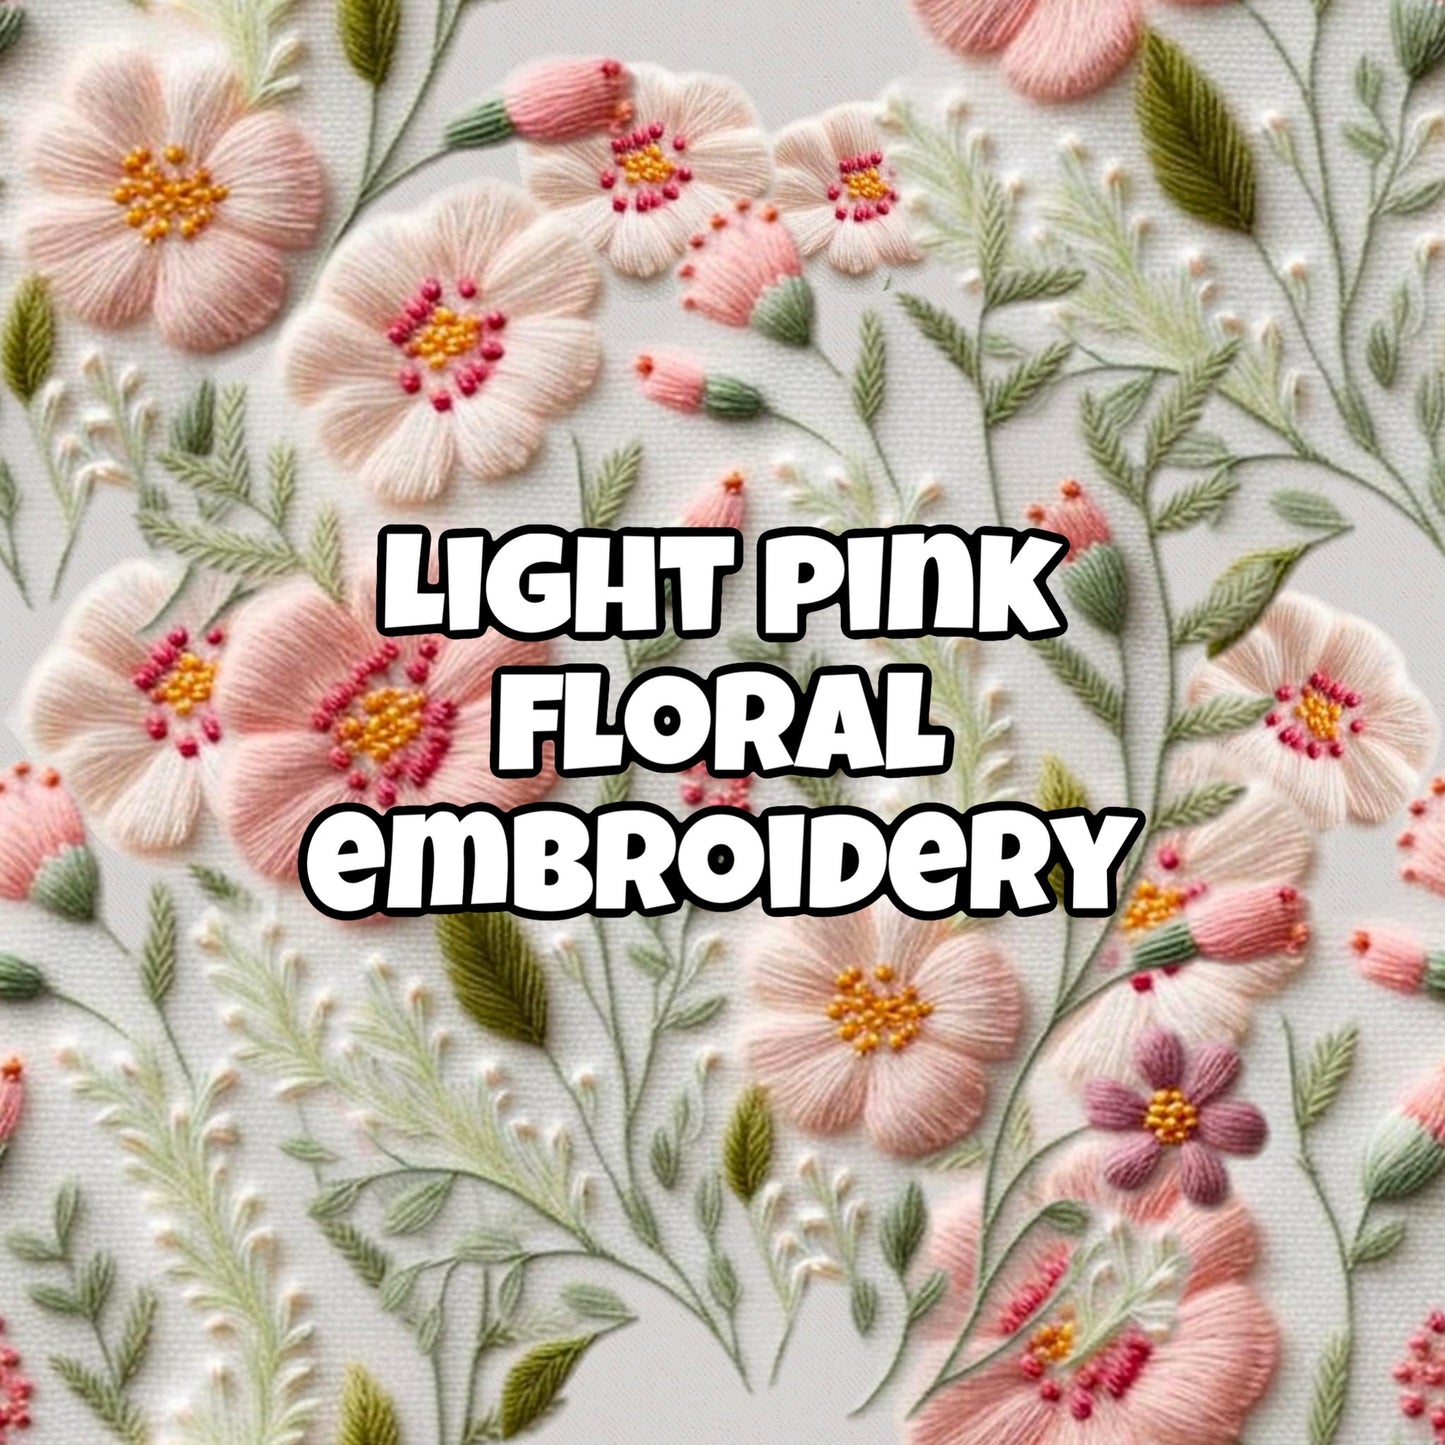 LIGHT PINK FLORAL EMBROIDERY